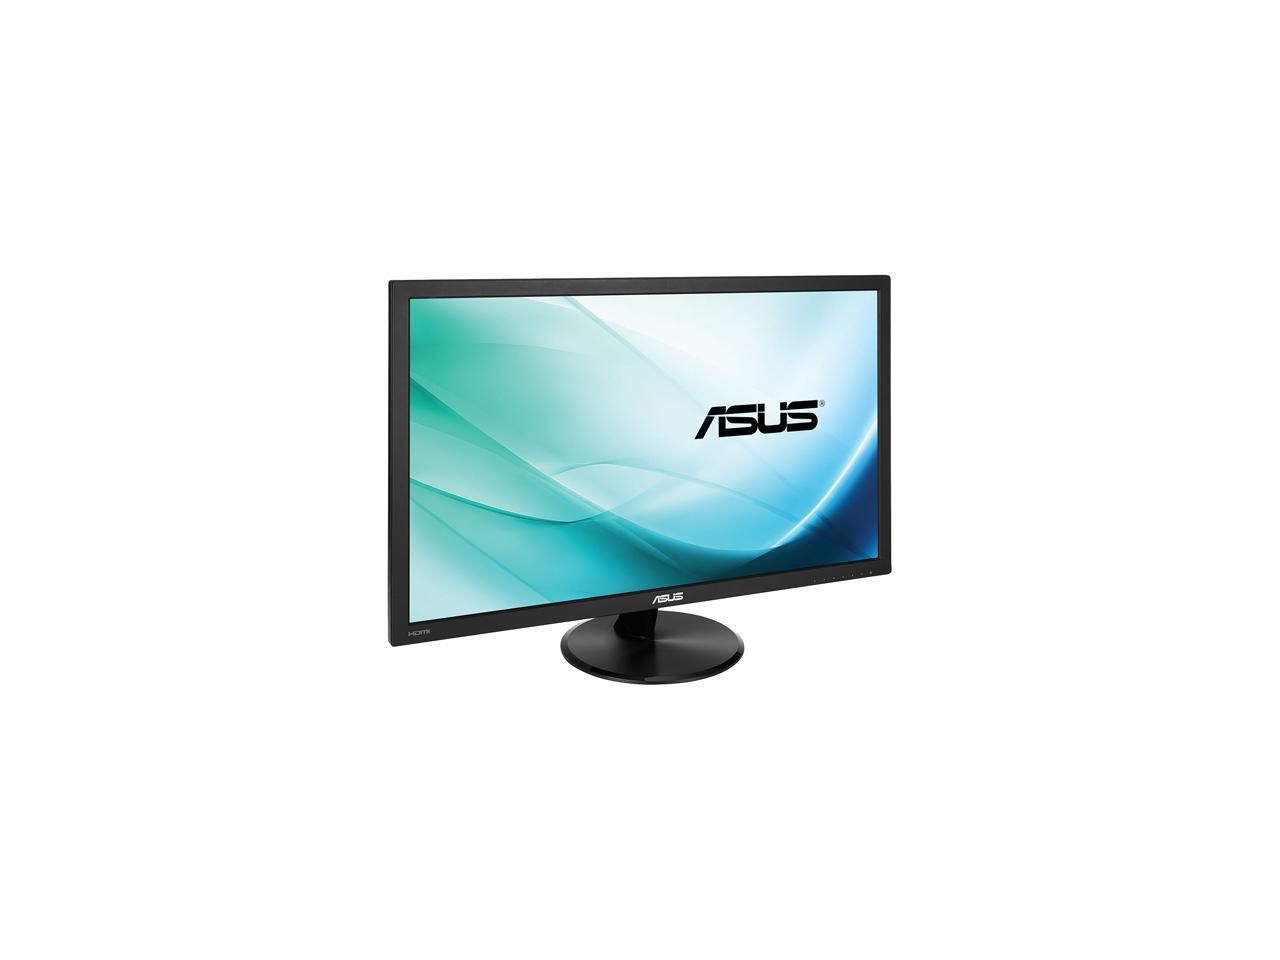 ASUS VP278H-P 27" Full HD 1920 x 1080 1ms 2x HDMI VGA Asus Eye Care Low Blue-Light Filter Flicker-Free Technology Built-in Speakers HDCP Support Non-Glare LED Backlit Gaming Monitor